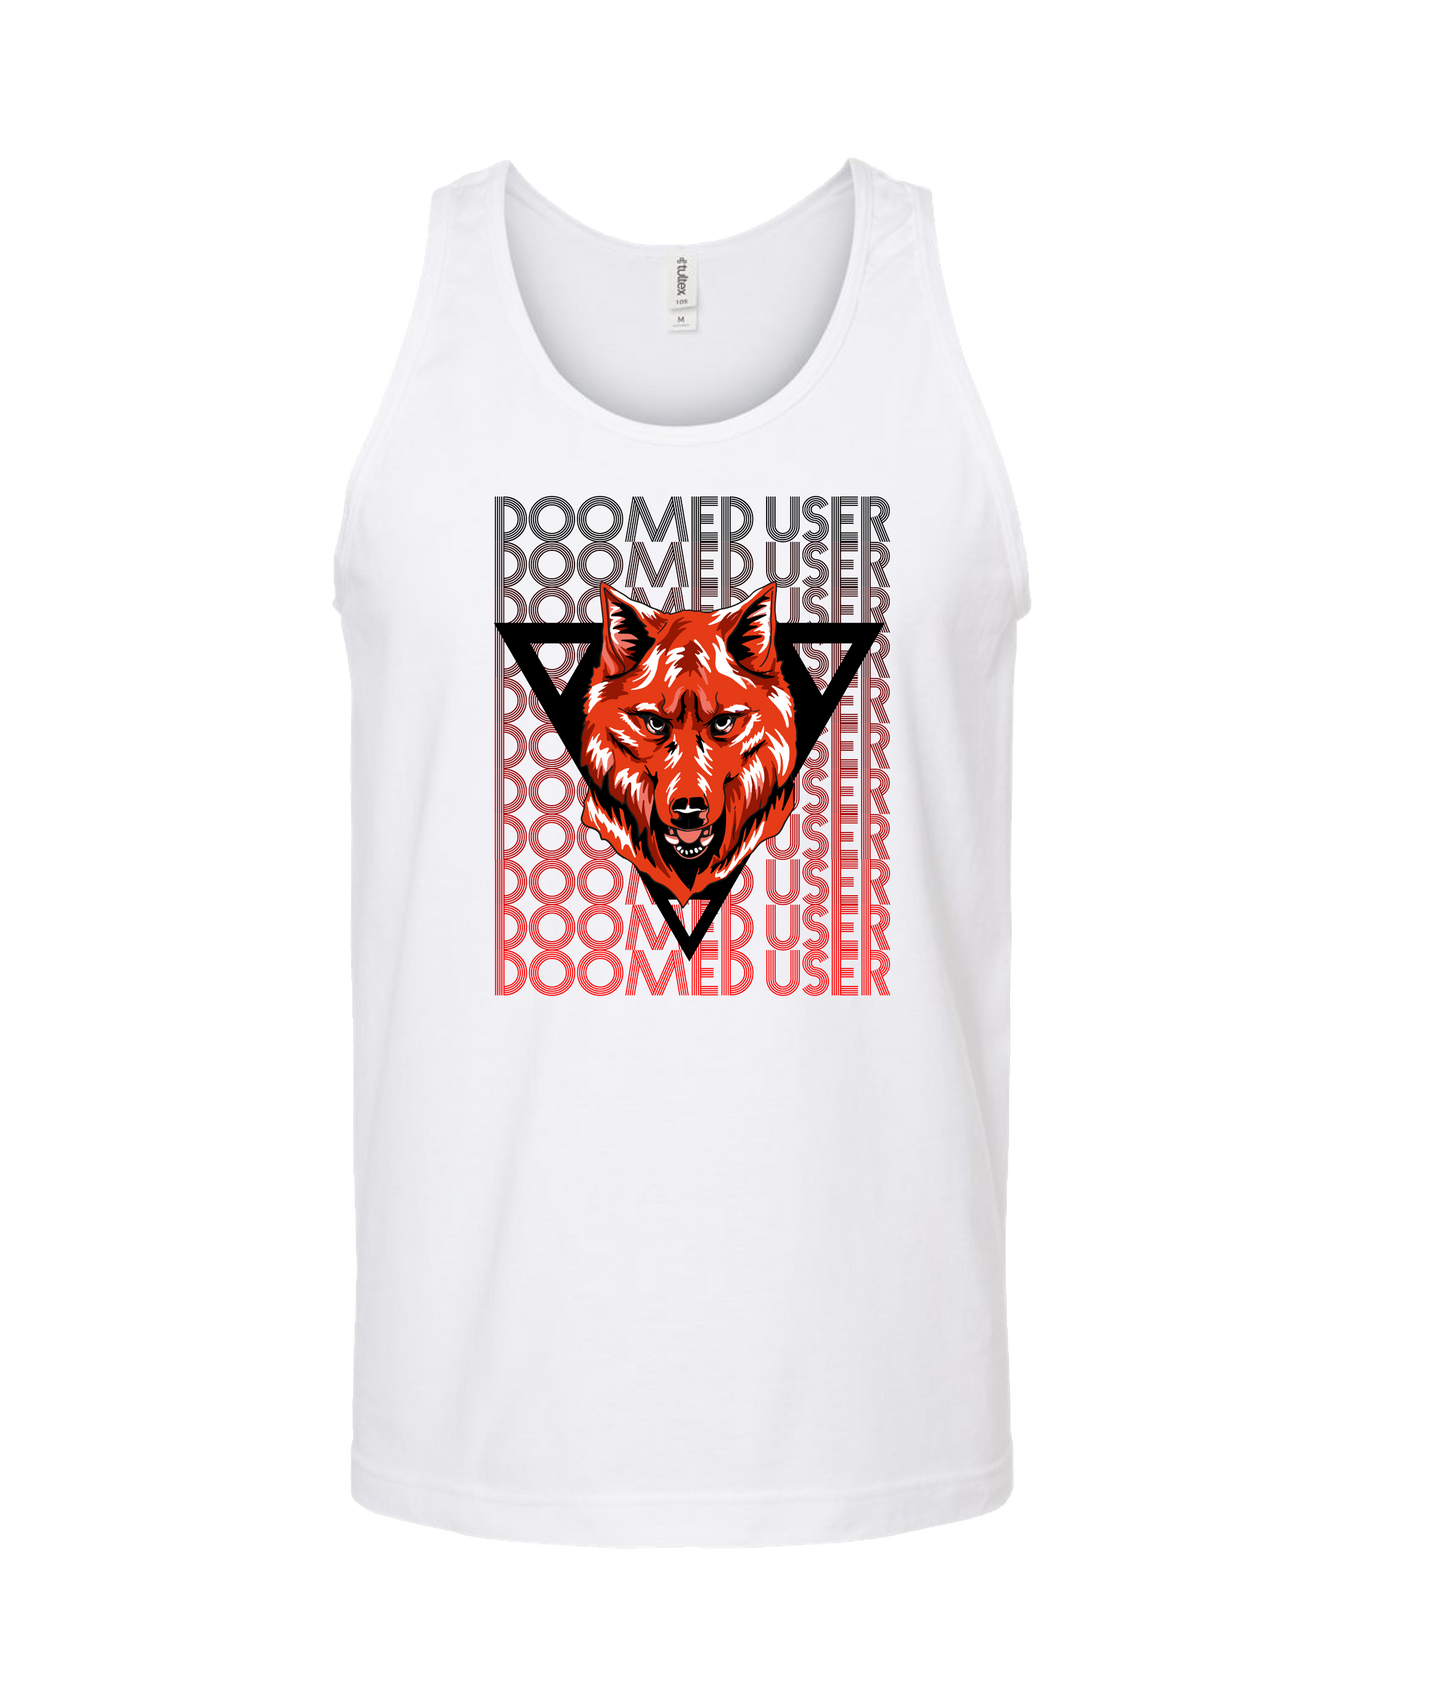 Doomed User - Wolf Red - White Tank Top